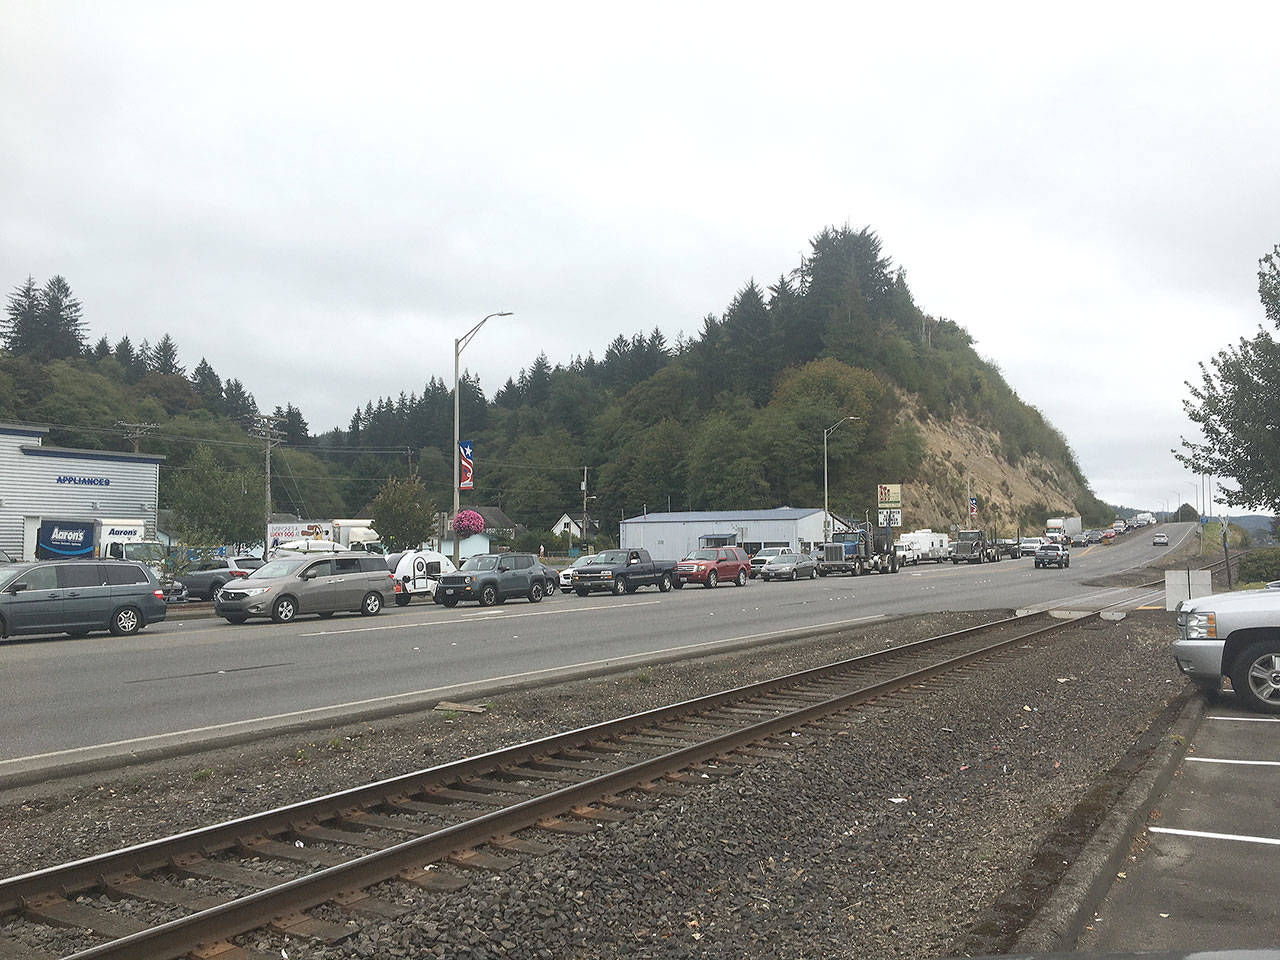 Just after noon on Friday, inbound traffic was already backing along the bluffs on the approach to Aberdeen. (Dan Hammock/The Daily World)